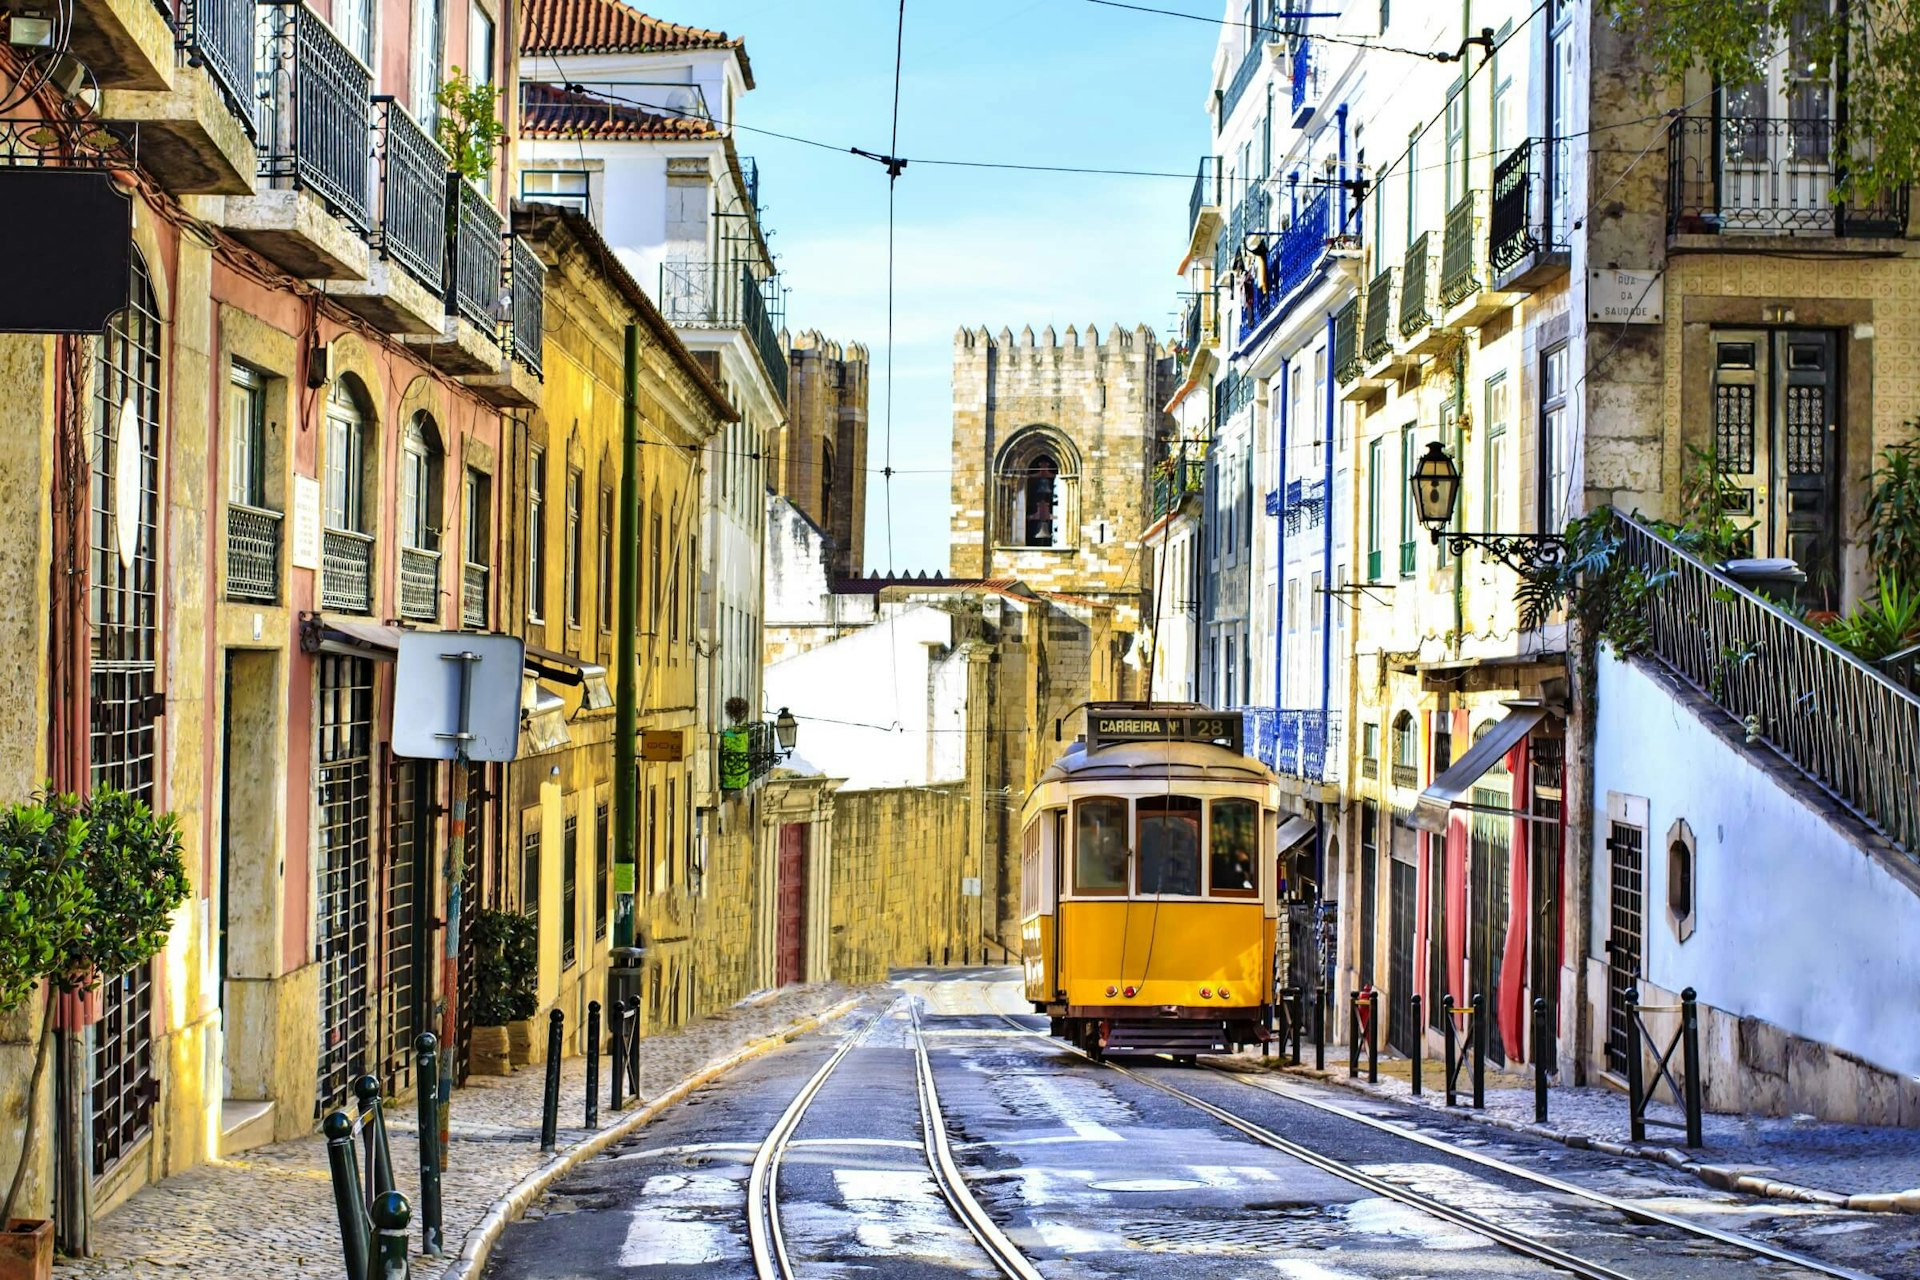 Empty Lisbon street with yellow tram and the bell tower of Lisbon Cathedral in the background.